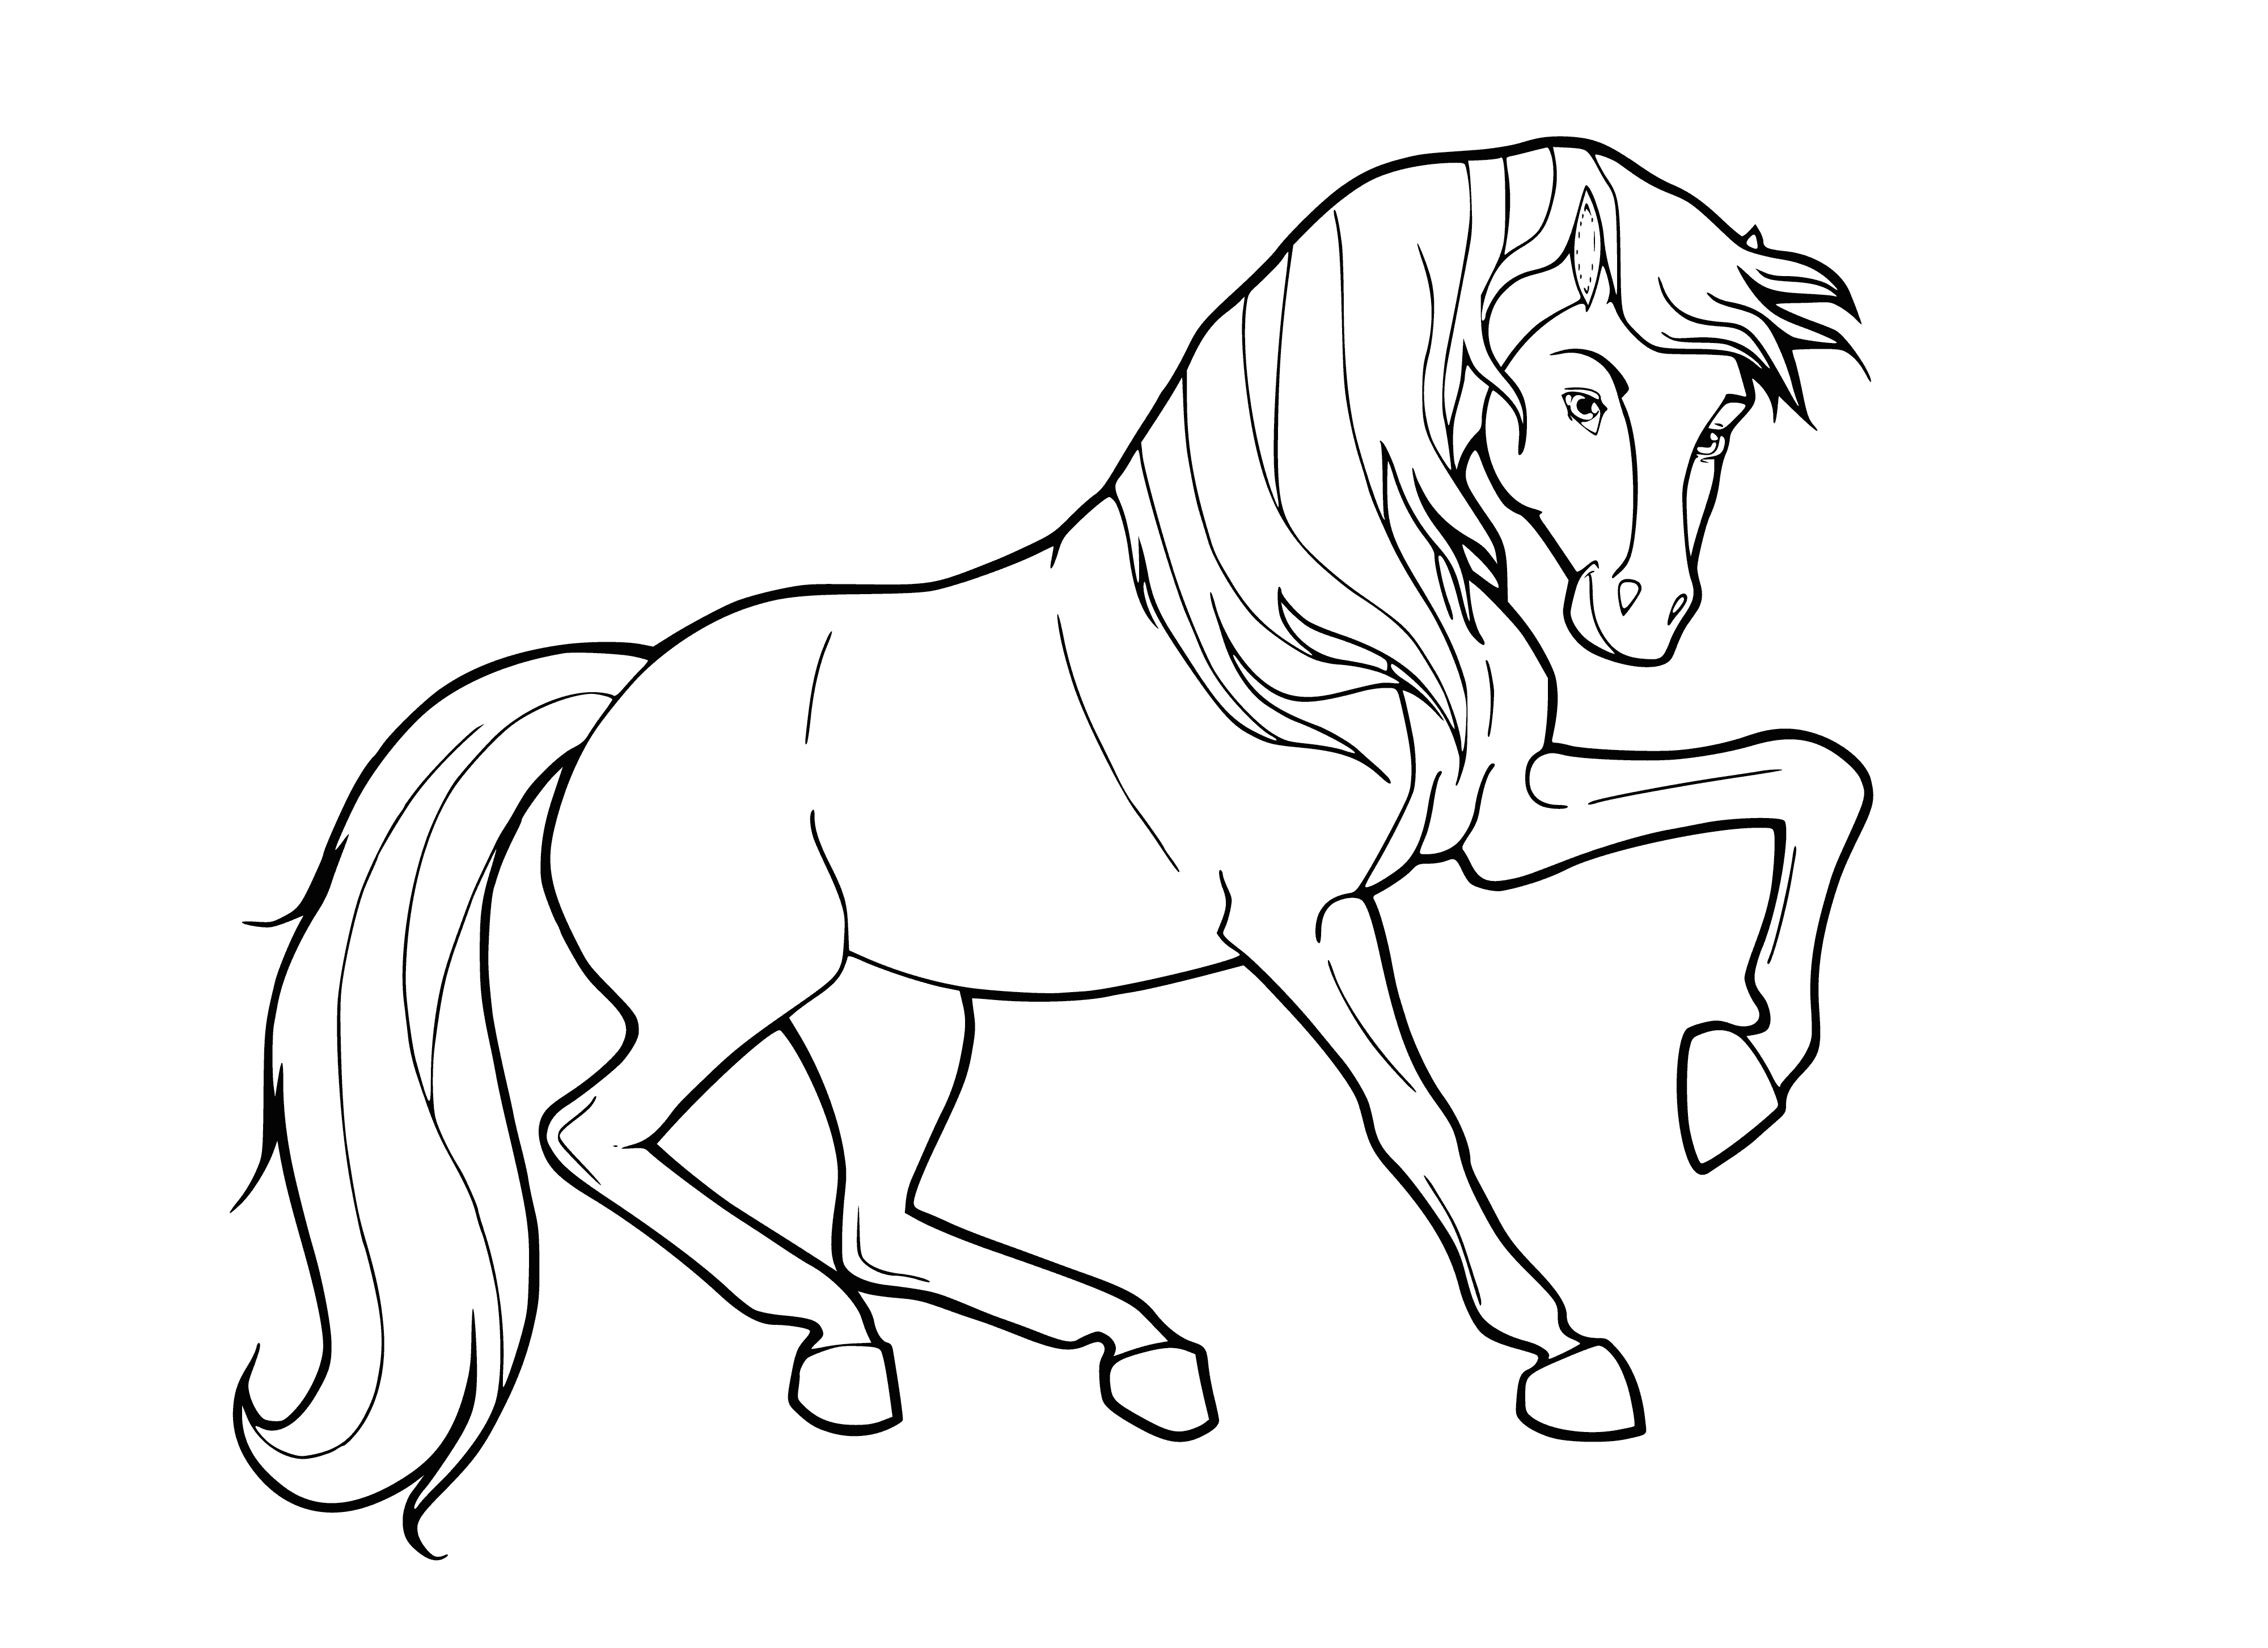 Horse coloring page